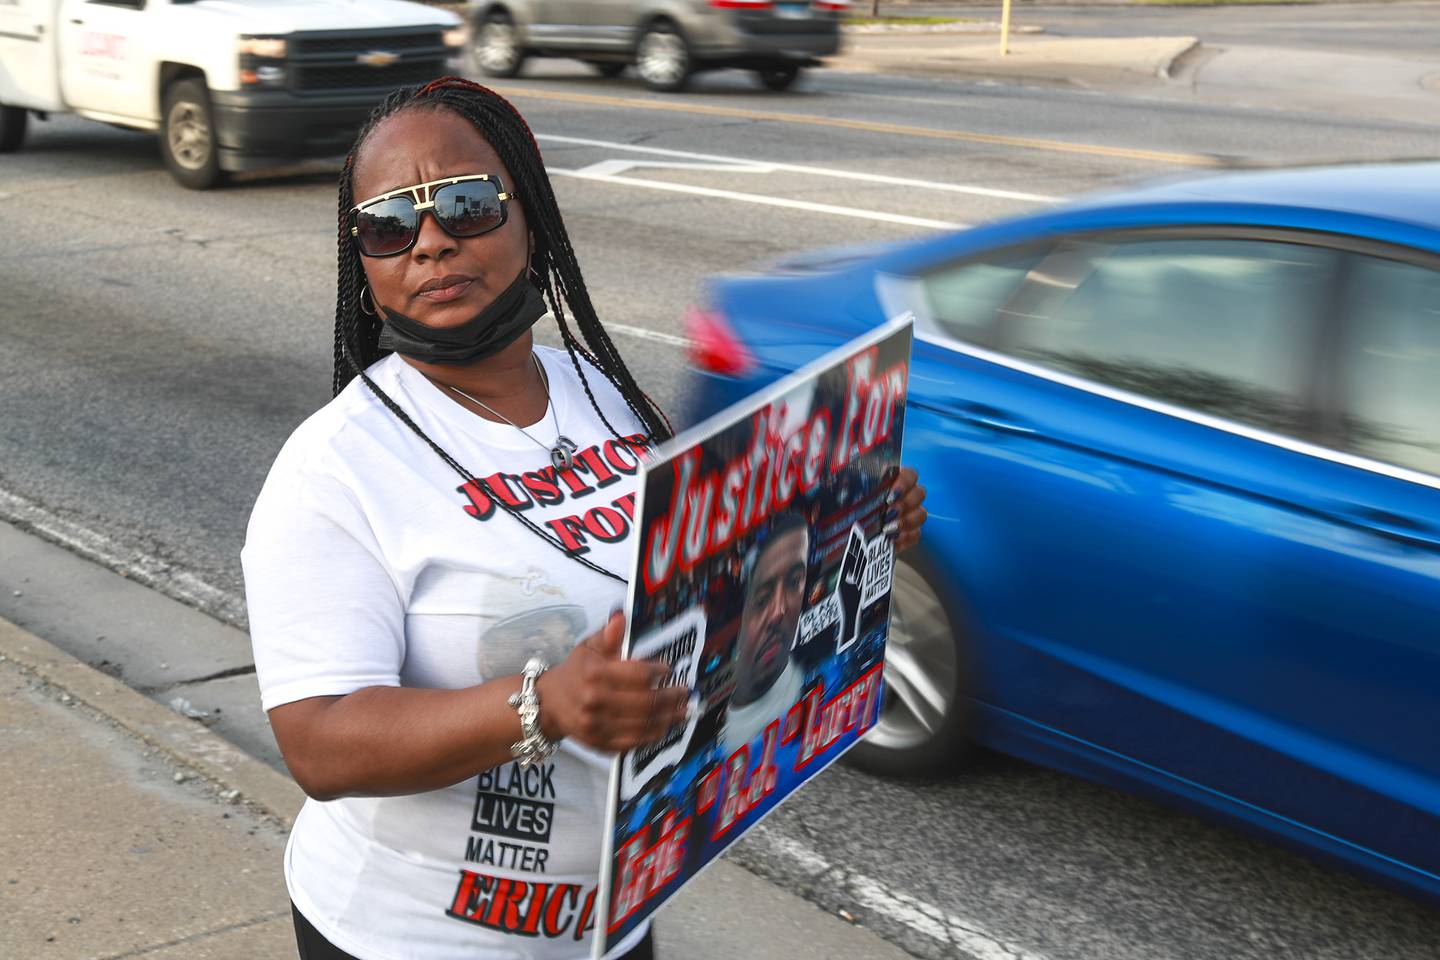 Nicole Lurry, widow of Eric Lurry, the Joliet man who died of an overdose in police custody, holds a sign calling for justice on Tuesday, April 27, 2021, at the corner of Larkin Ave. and Jefferson st. in Joliet, Ill.